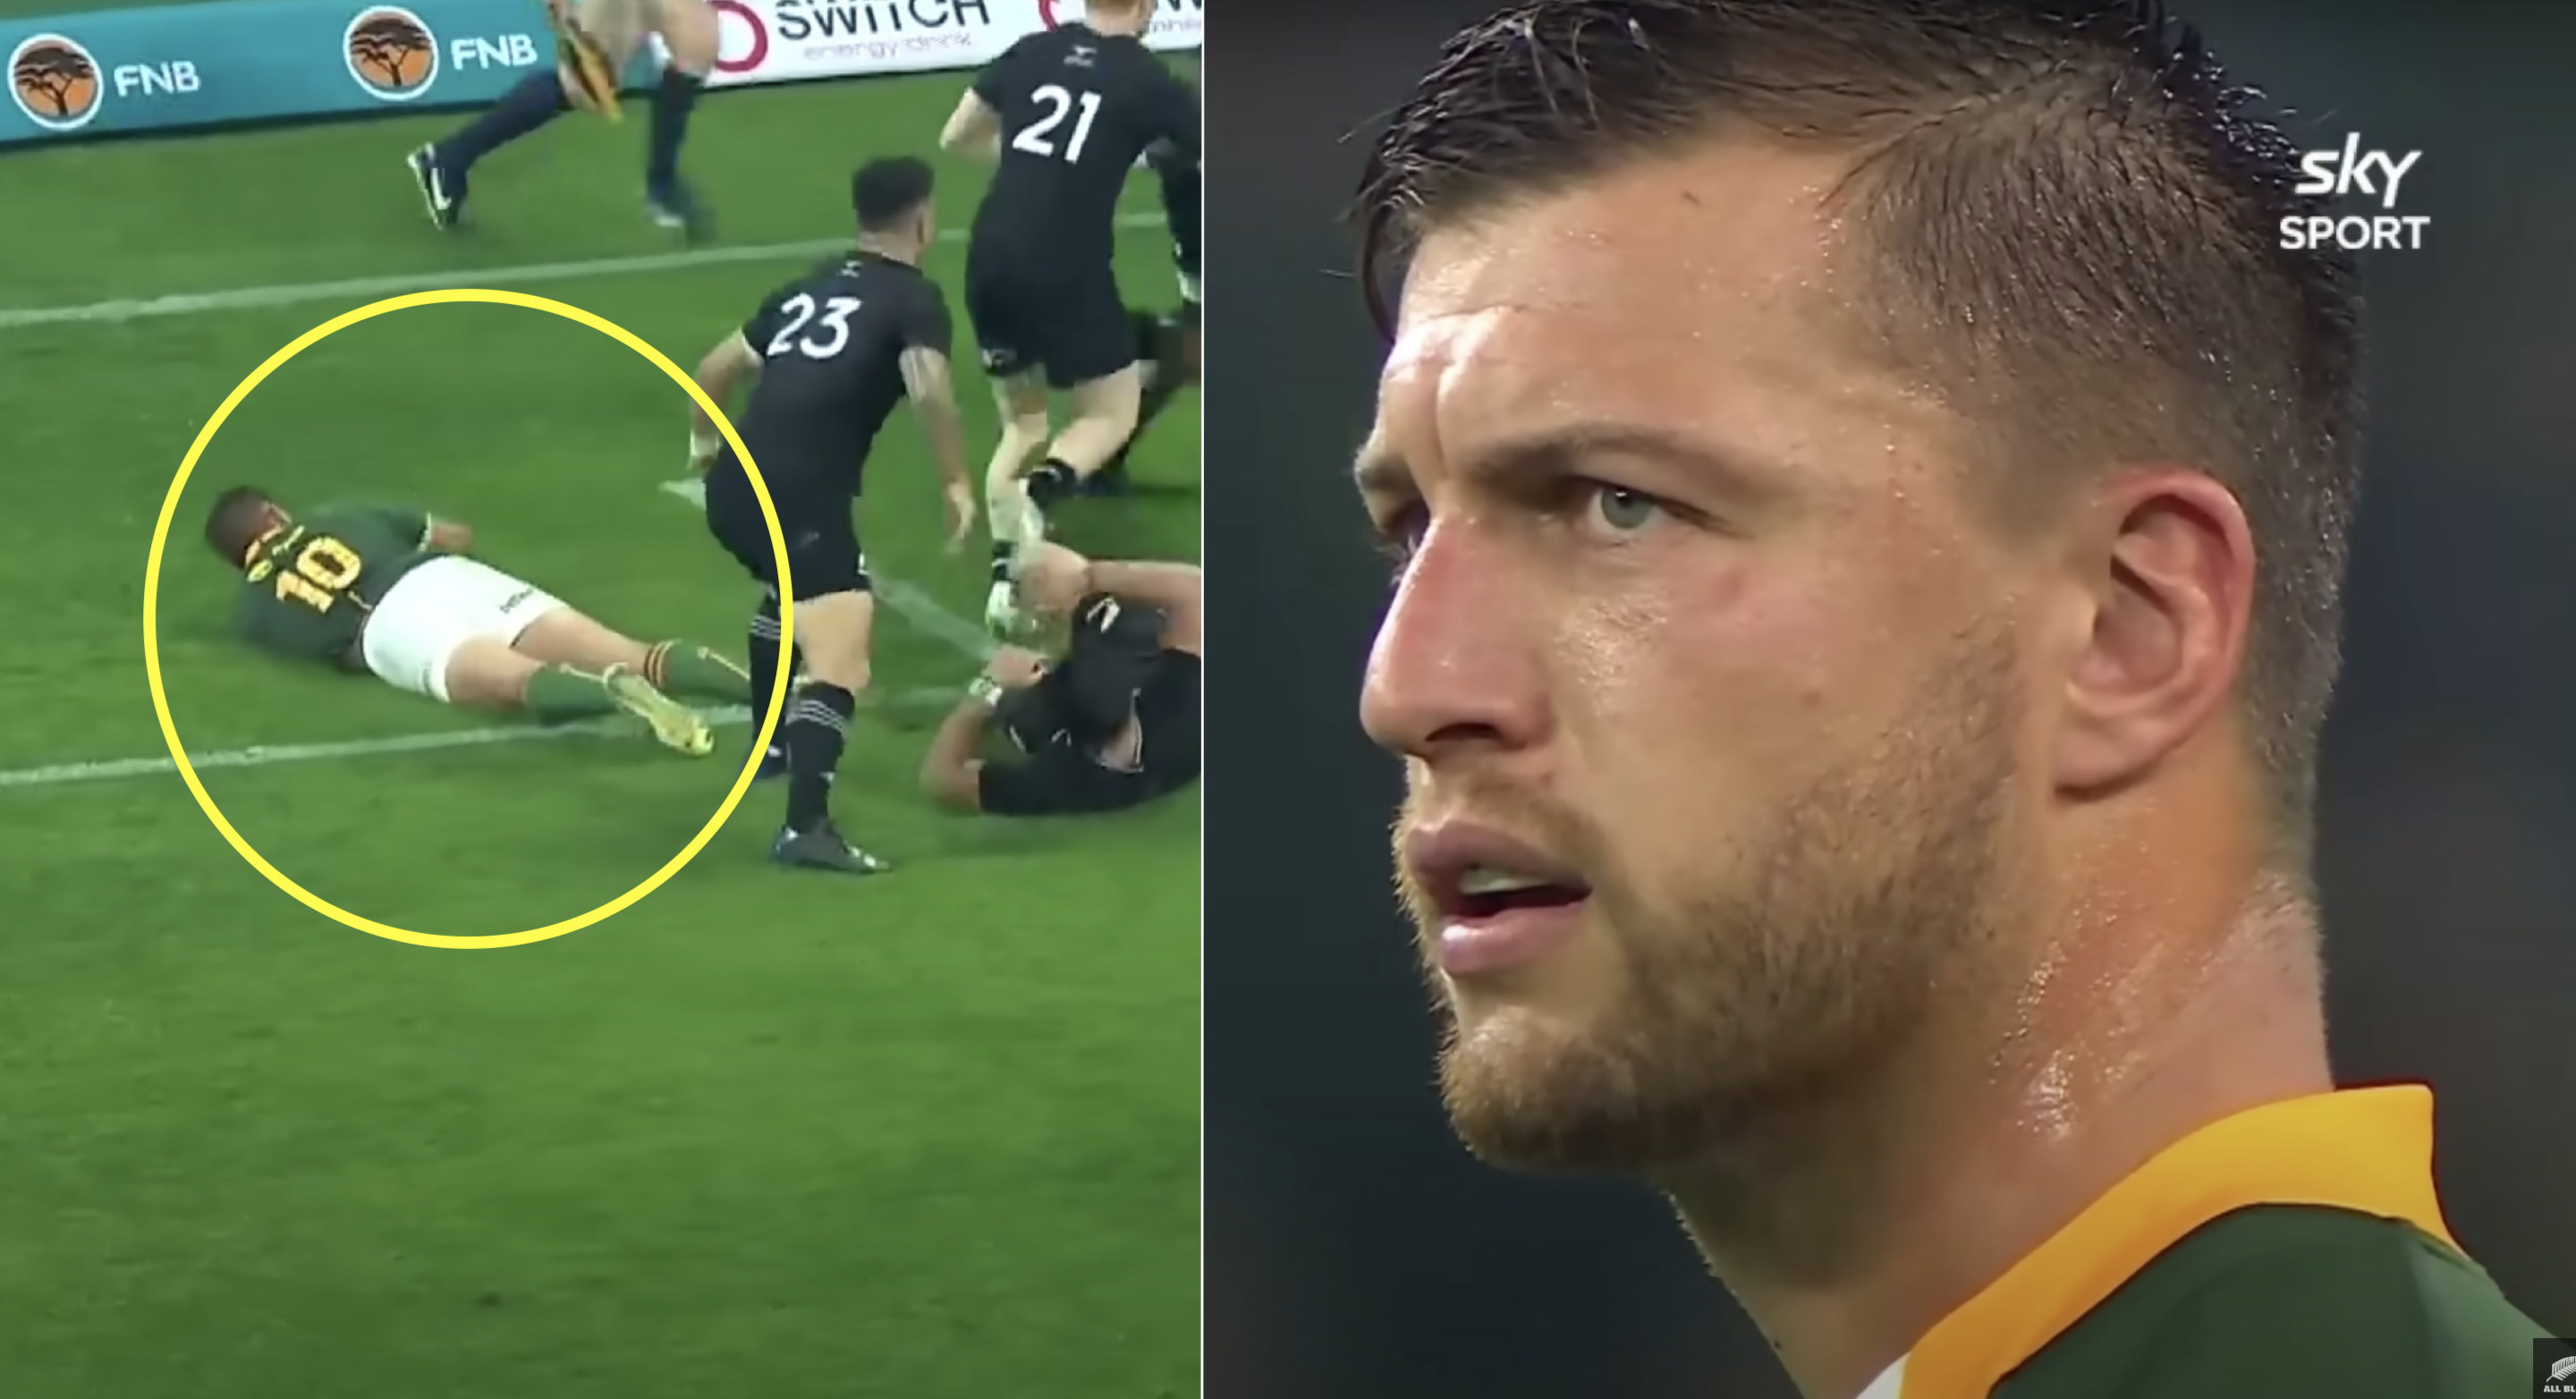 Handre Pollard floored twice in one minute by same All Black